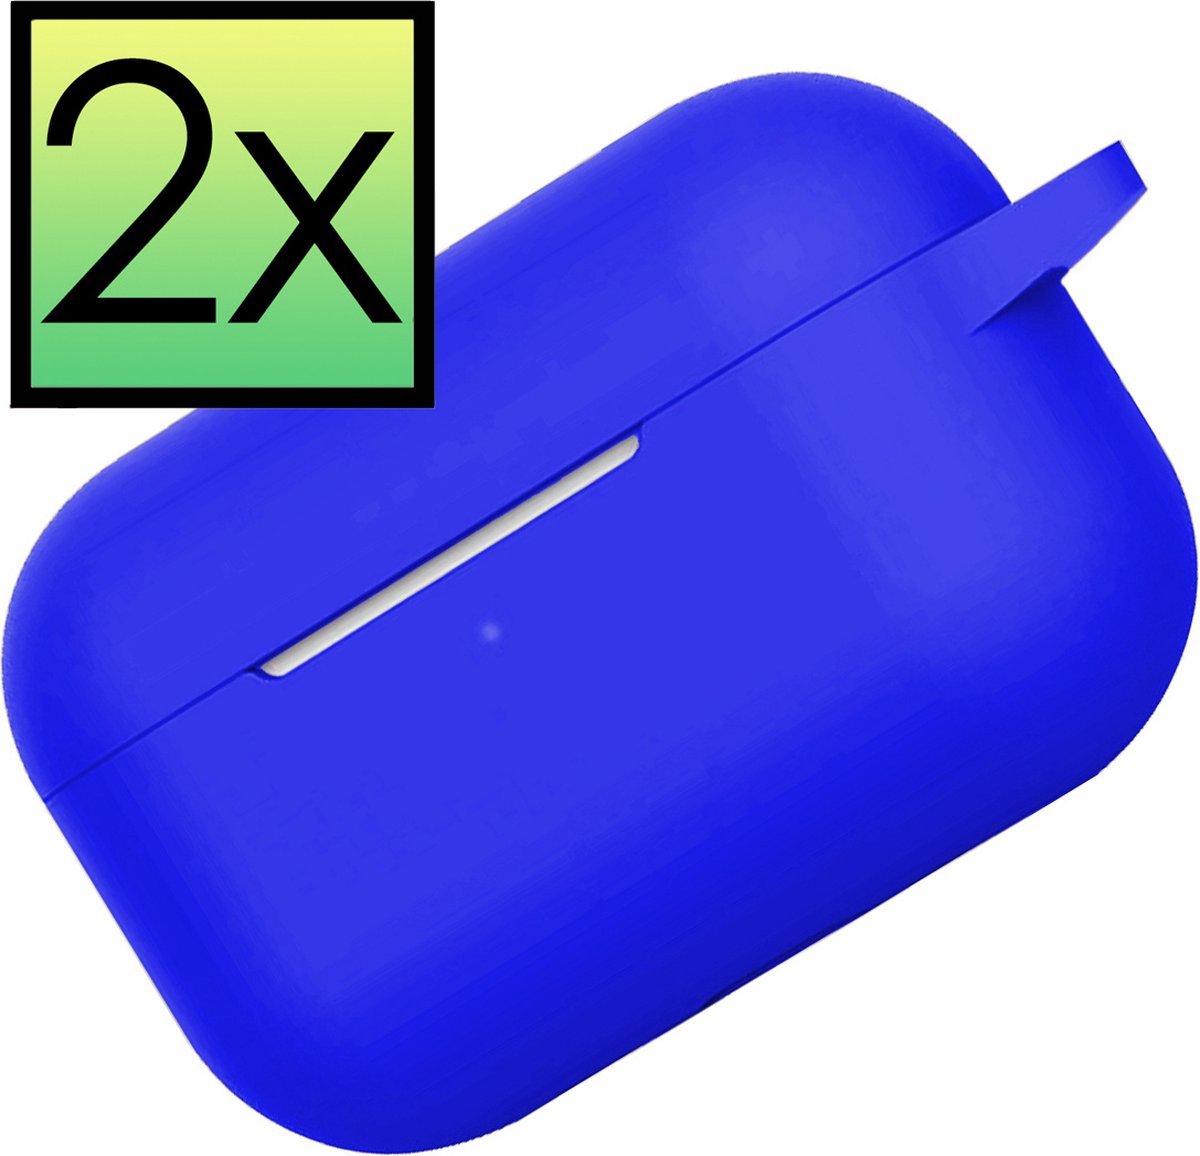 Hoes Geschikt voor AirPods Pro 2 Hoesje Cover Silicone Case Hoes - Blauw - 2x